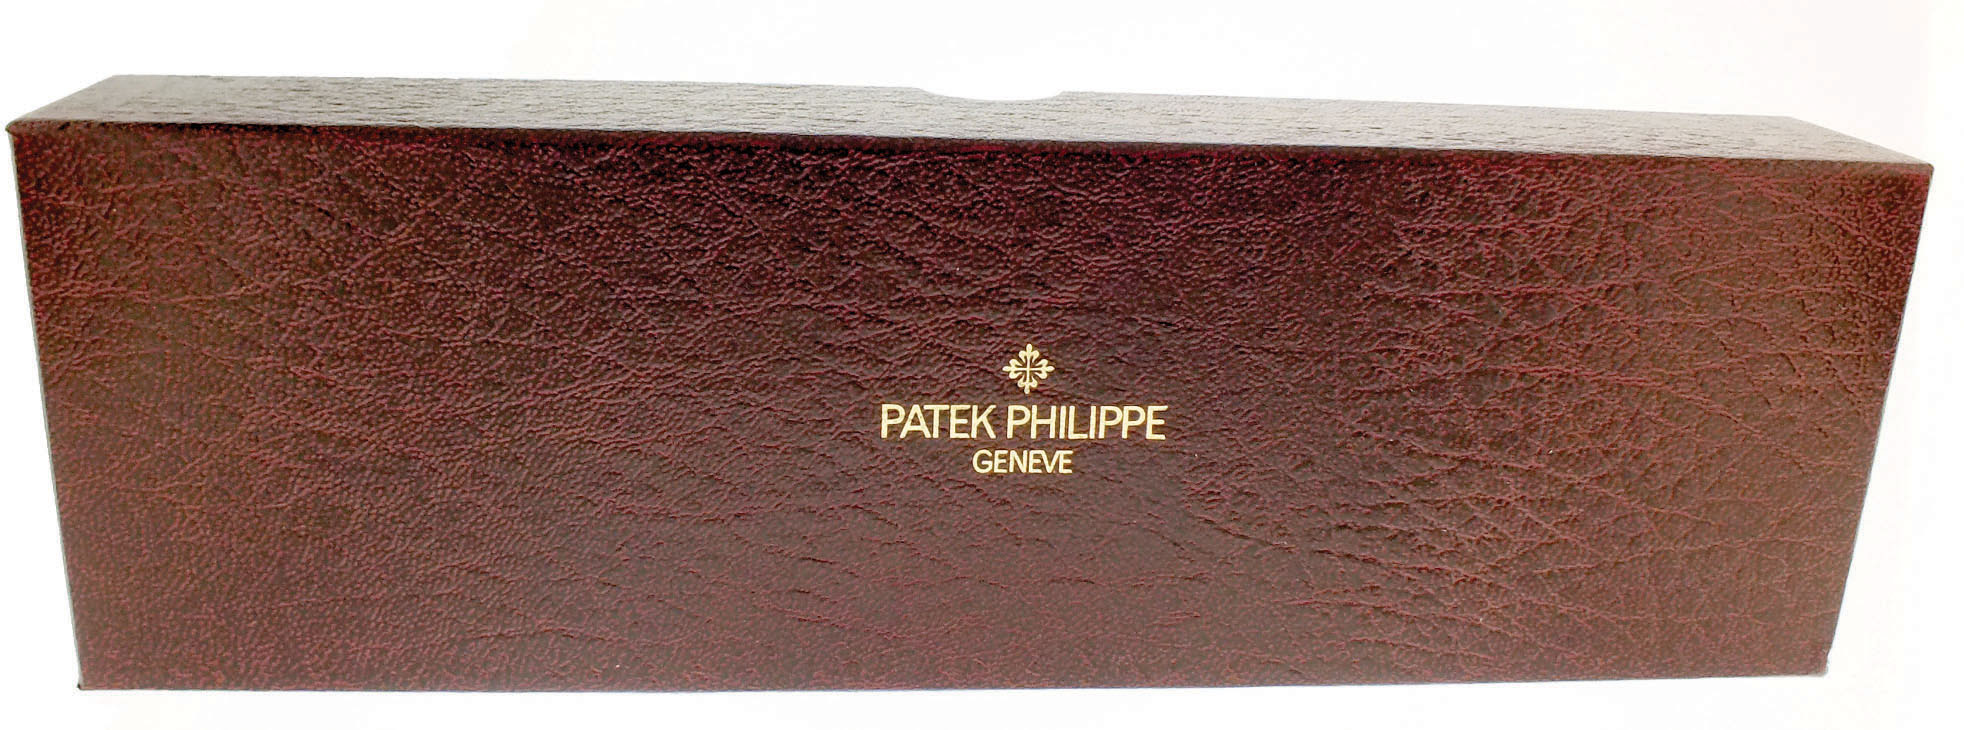 Patek Philippe ultra rare leather calf wallet for $431 for sale